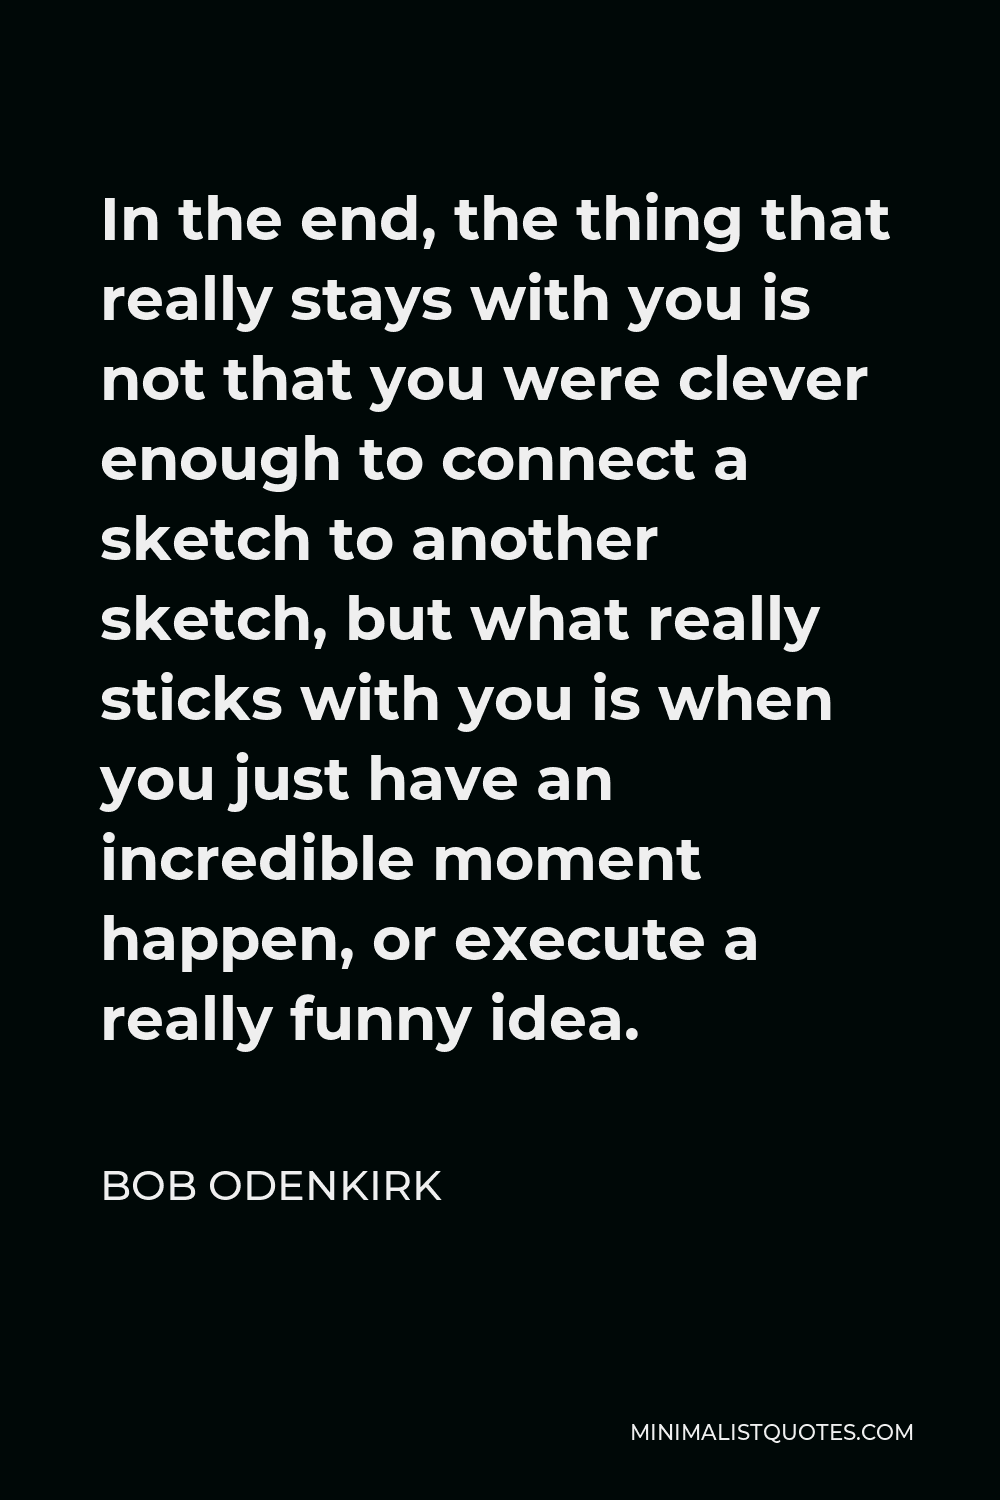 Bob Odenkirk Quote - In the end, the thing that really stays with you is not that you were clever enough to connect a sketch to another sketch, but what really sticks with you is when you just have an incredible moment happen, or execute a really funny idea.